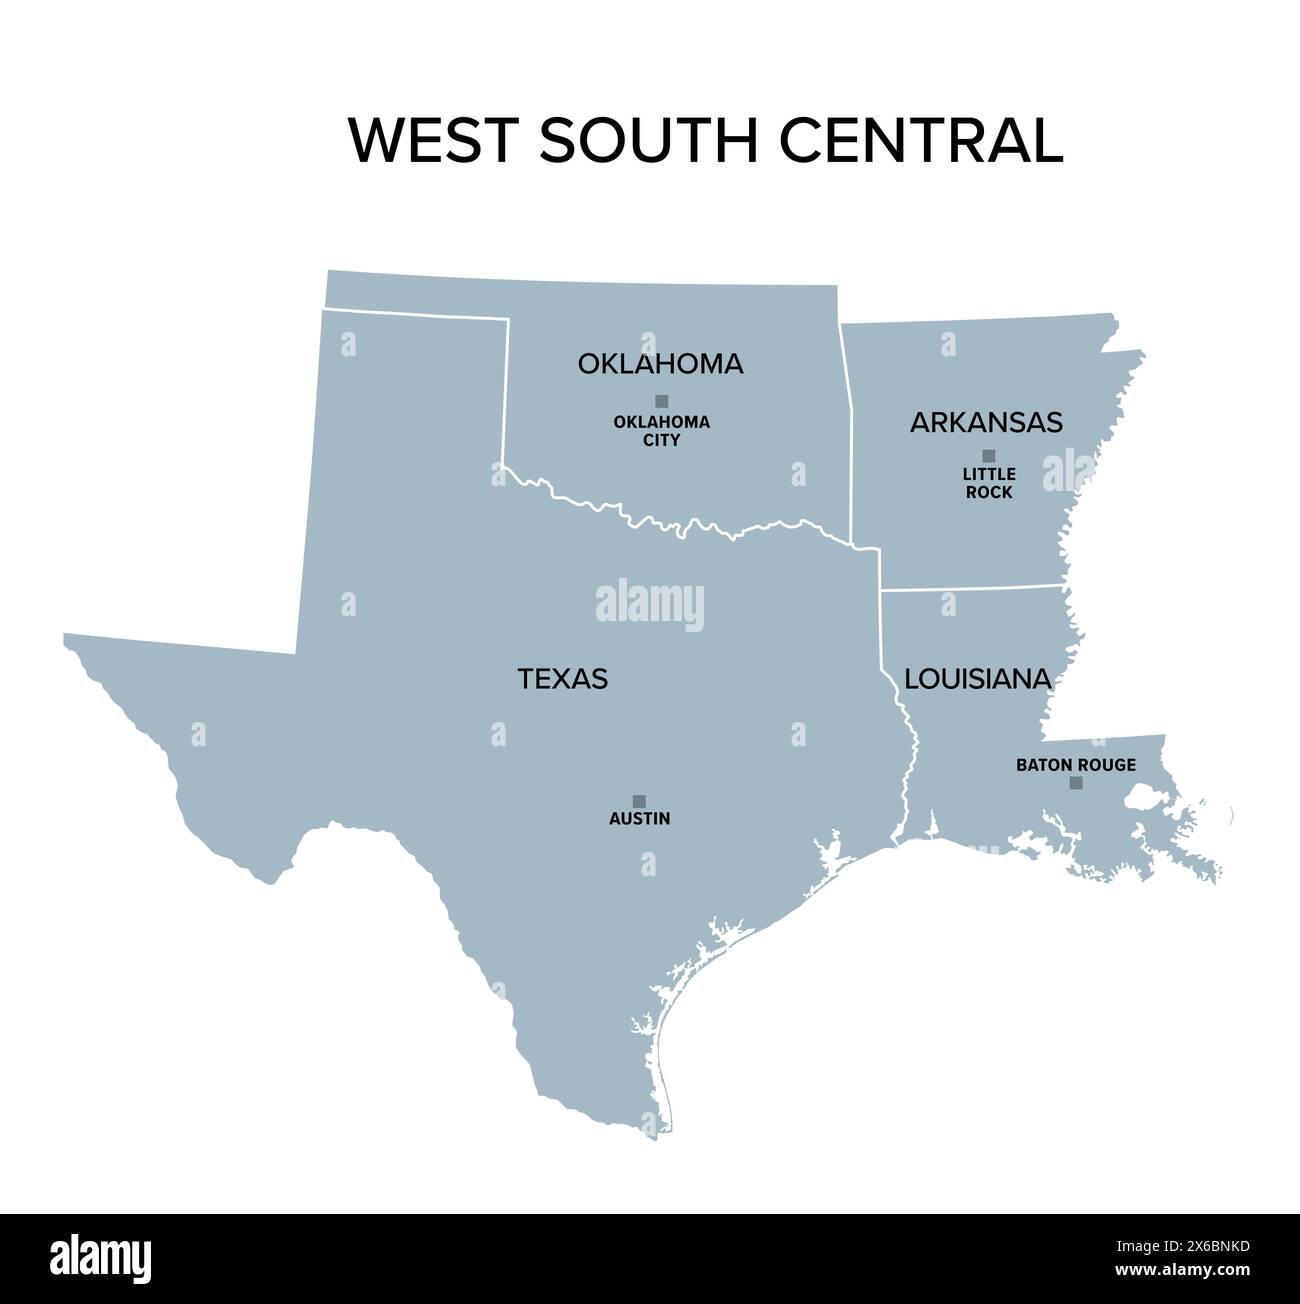 West South Central states, graue politische Karte. United States Census Division of the South Region. Stockfoto